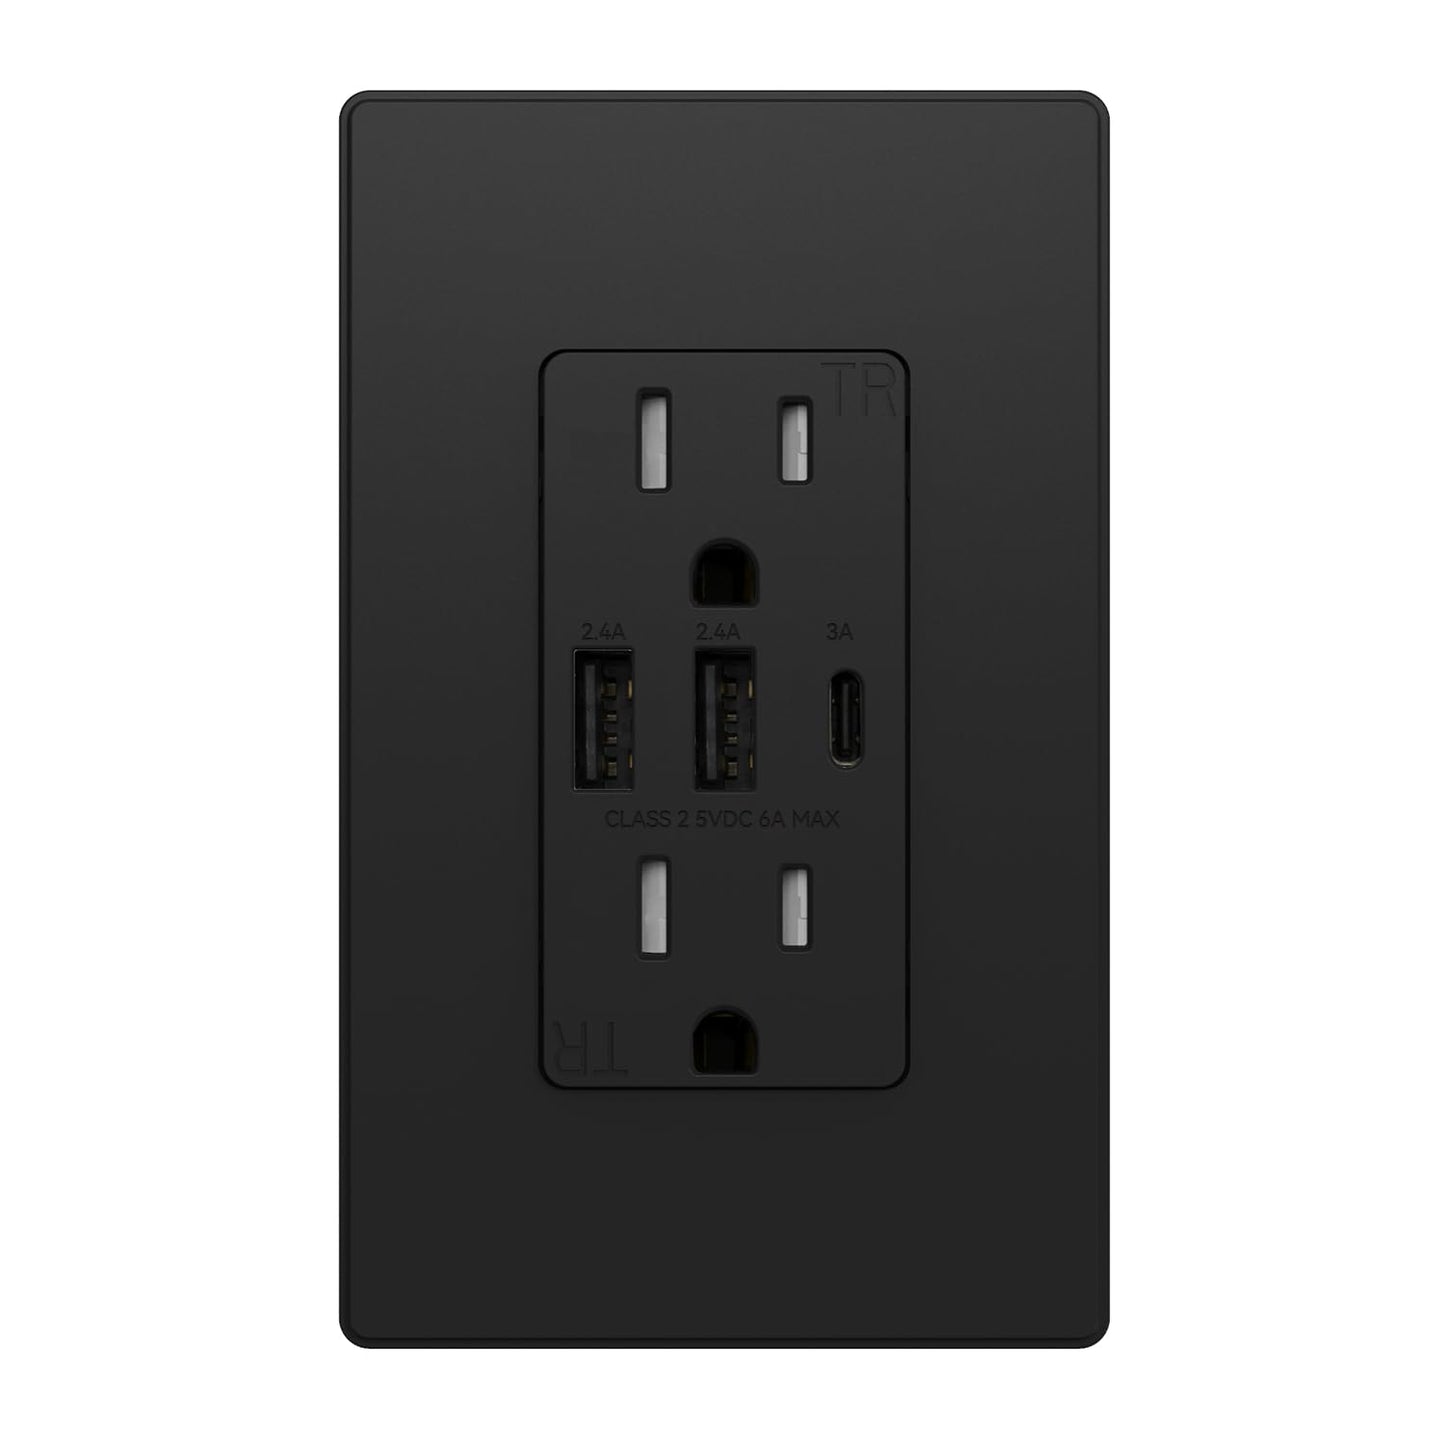 ELEGRP USB Outlet Receptacle, 3-Port USB C Wall Outlet, 30W 6.0A USB Electrical Outlet, Screwless Wall Plate Included